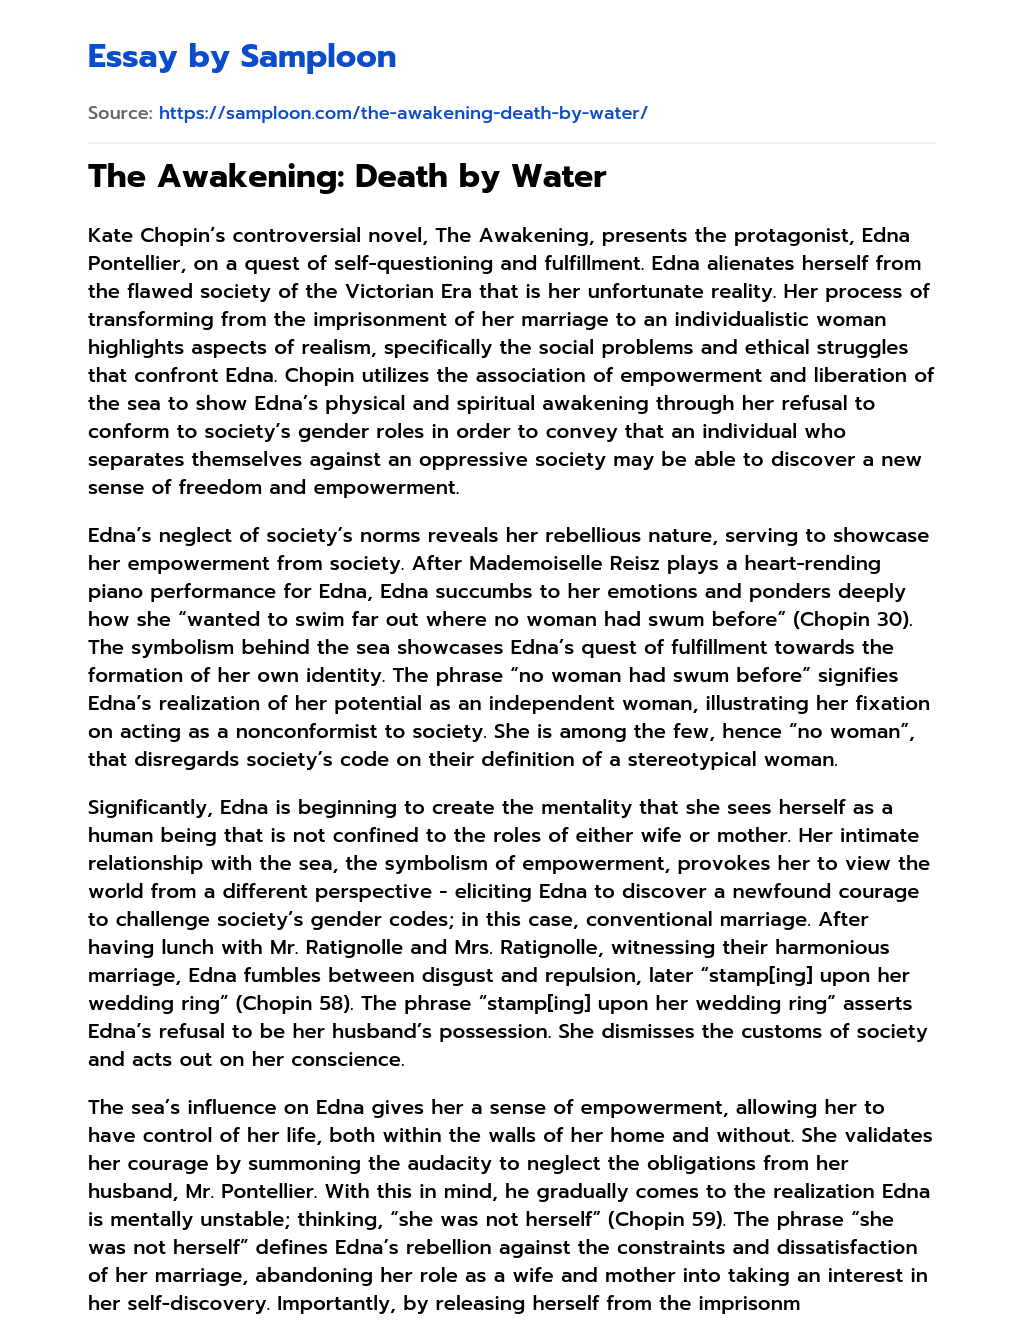 The Awakening: Death by Water essay